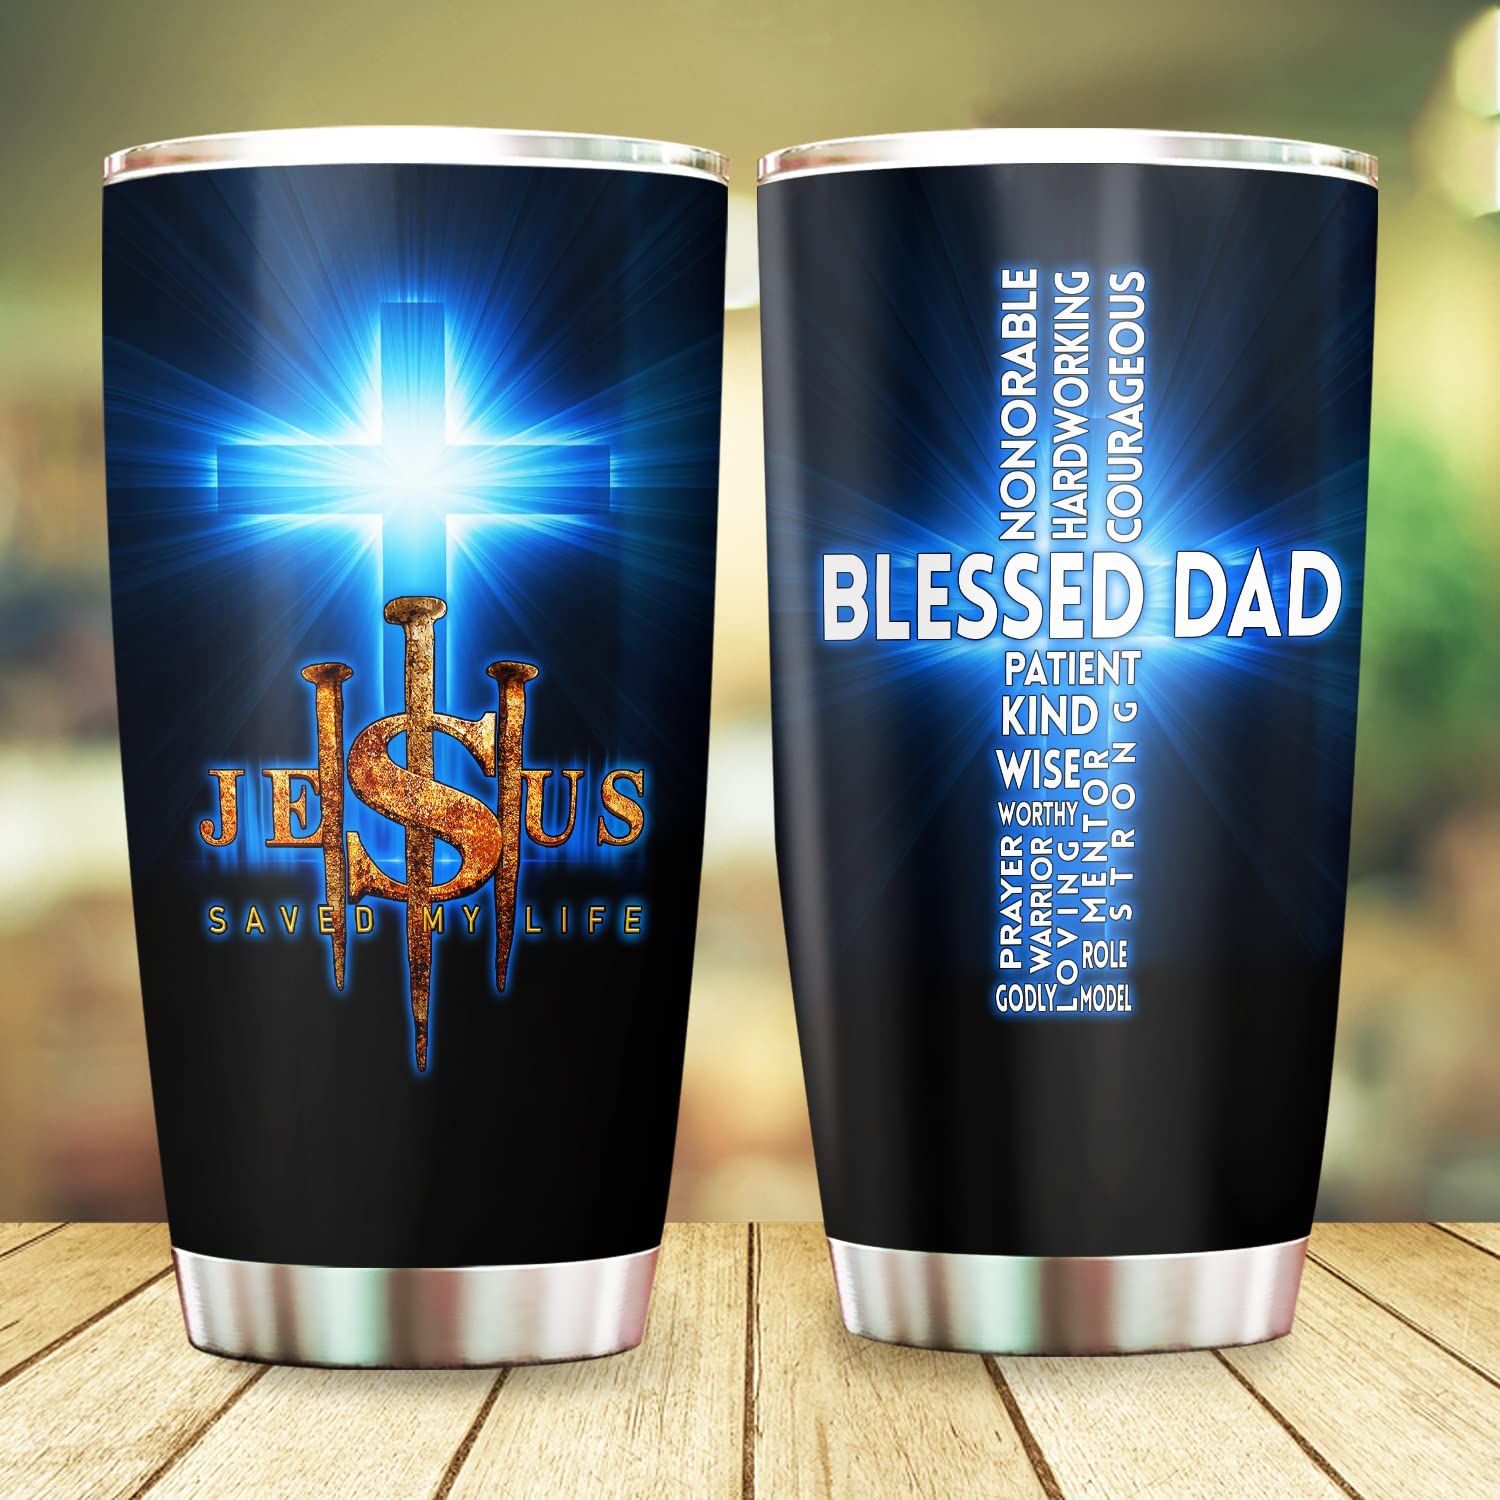 Jesus is My Savior Jesus Saved My Life Tumbler - Blessed Dad Tumbler Bible Verse God Cross Christian Gifts for Men 20oz Stainless Steel with Lid Cold & Hot Water Coffee